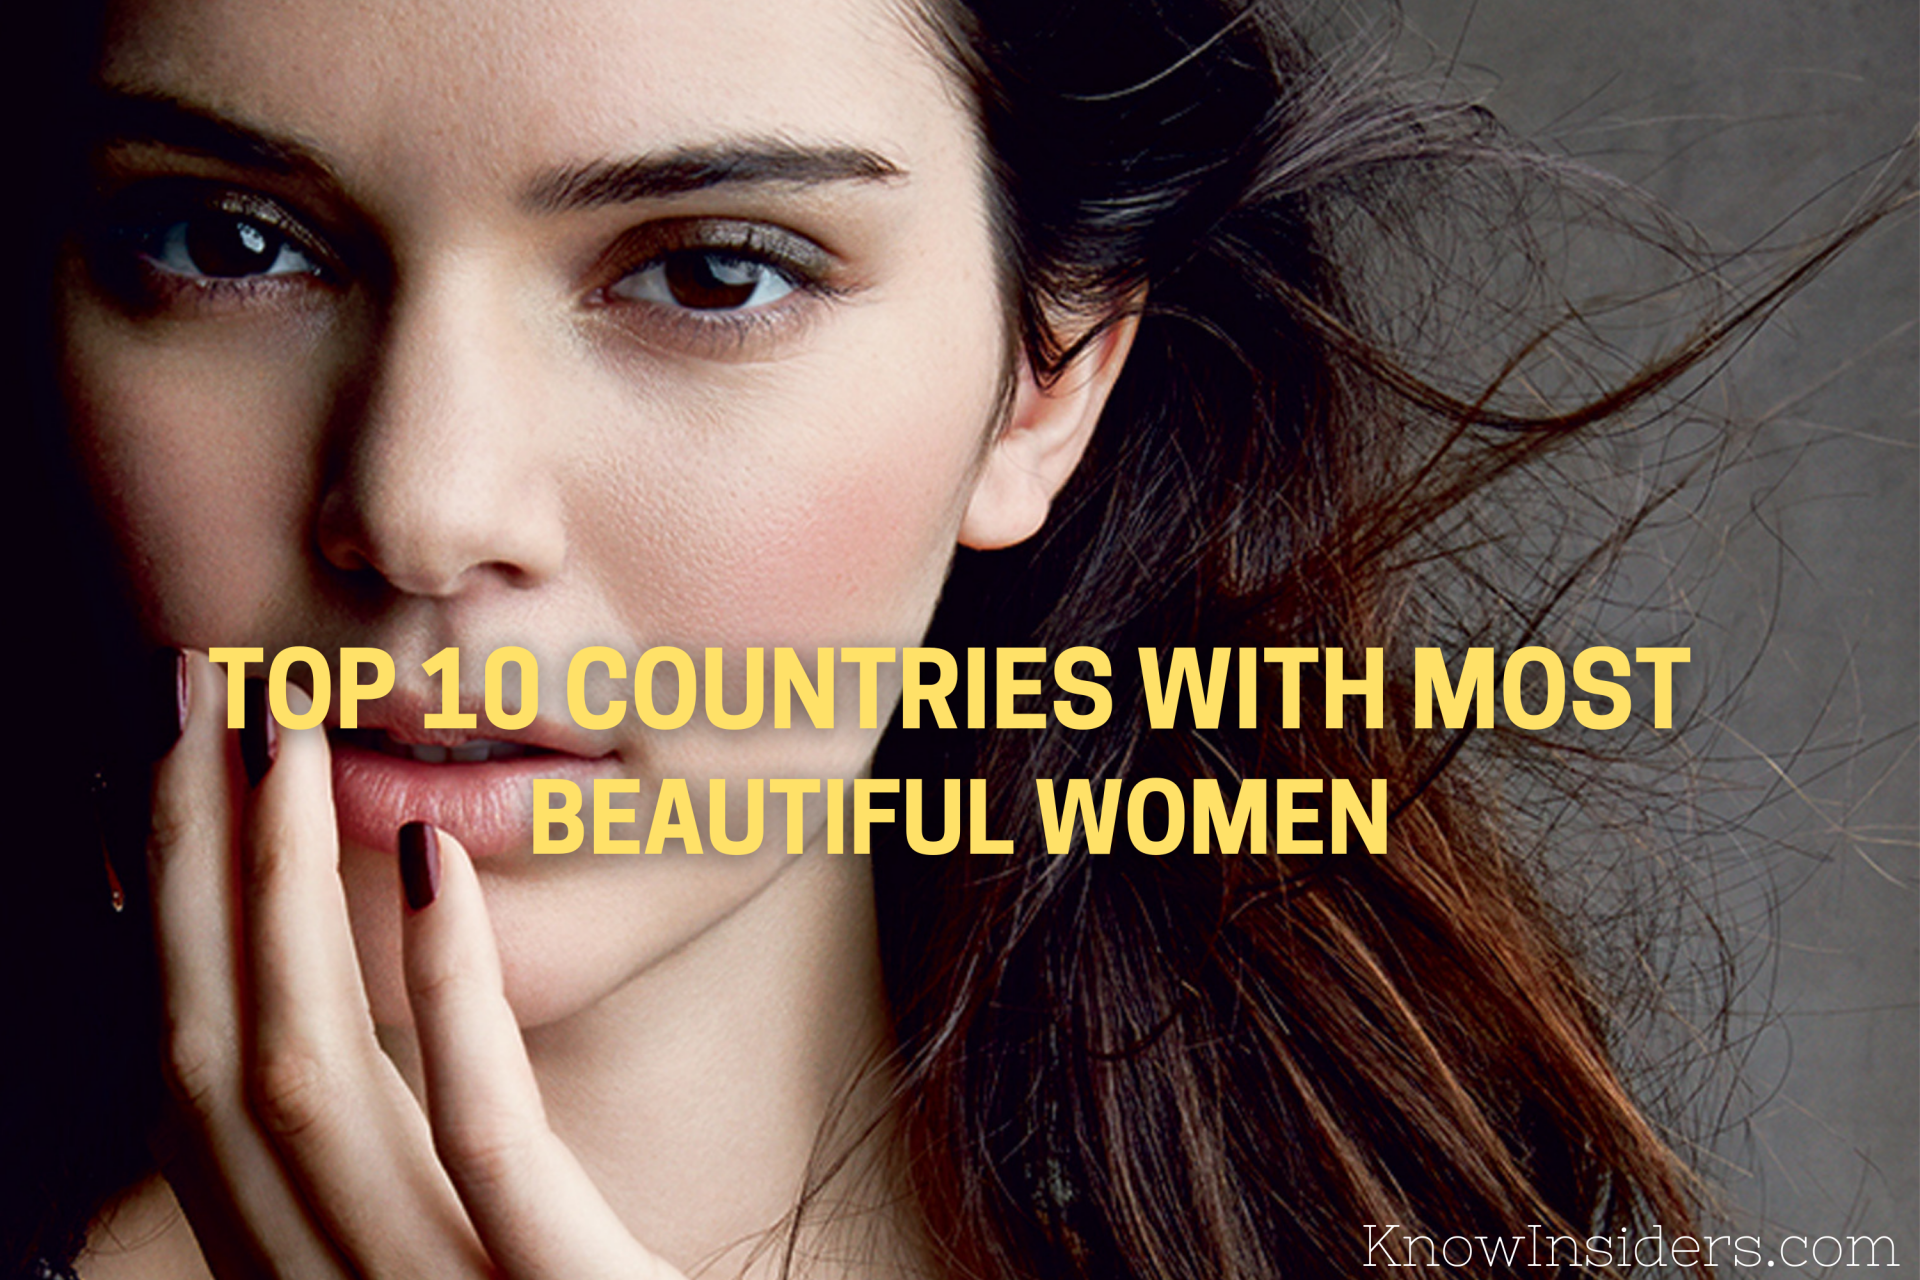 Top 10 Countries Having Most Beautiful Women in the World